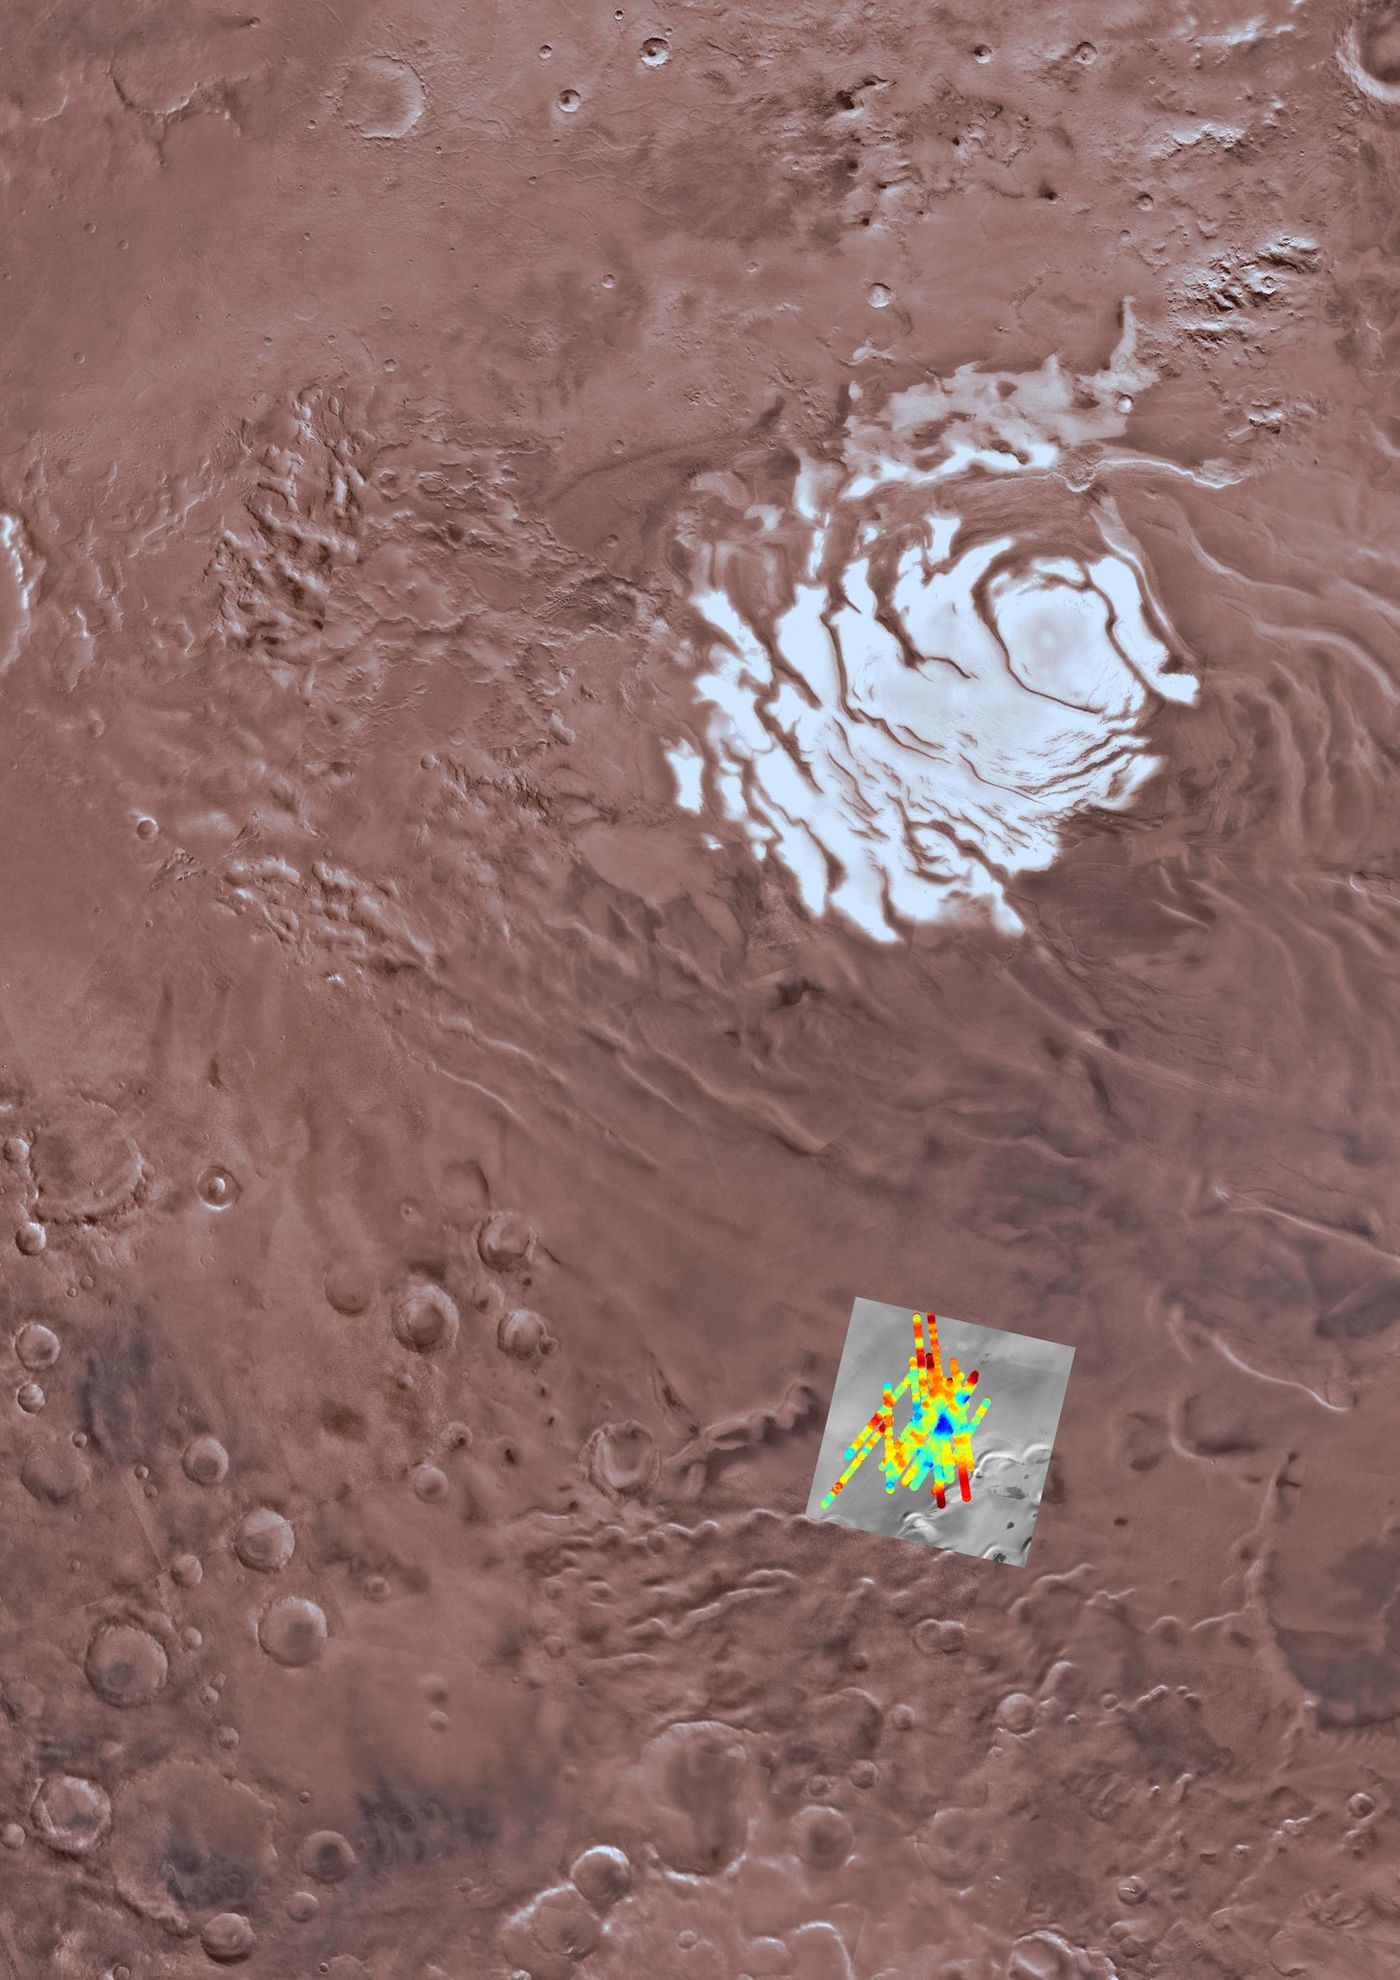 Here we see the potential liquid water stores underneath Mars' polar ice caps.